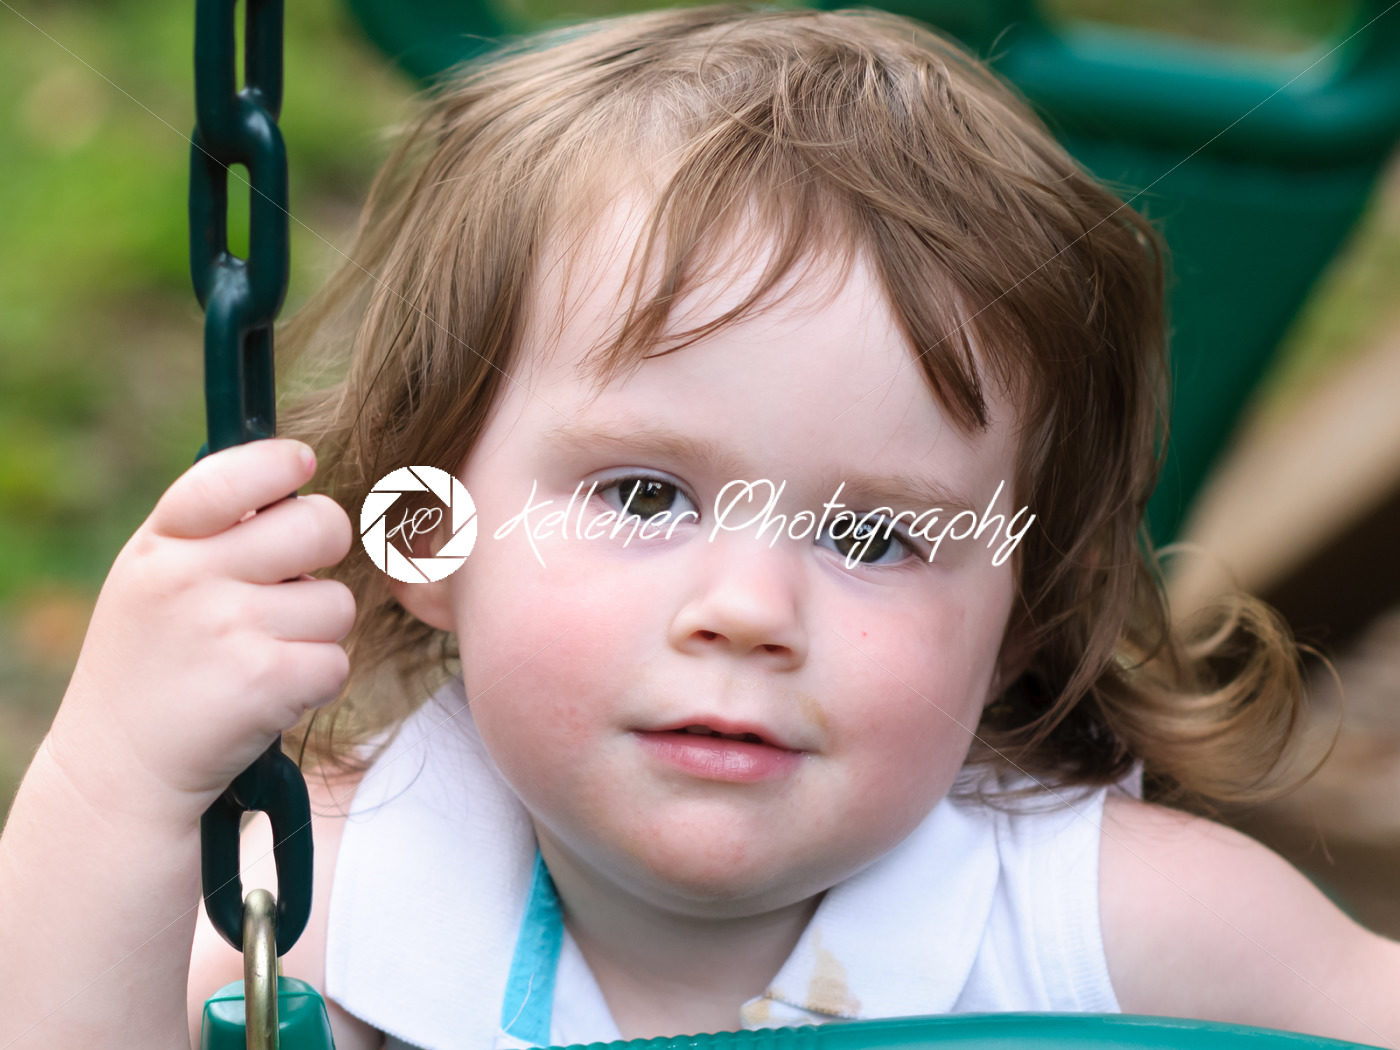 Young girl having fun on a swing - Kelleher Photography Store